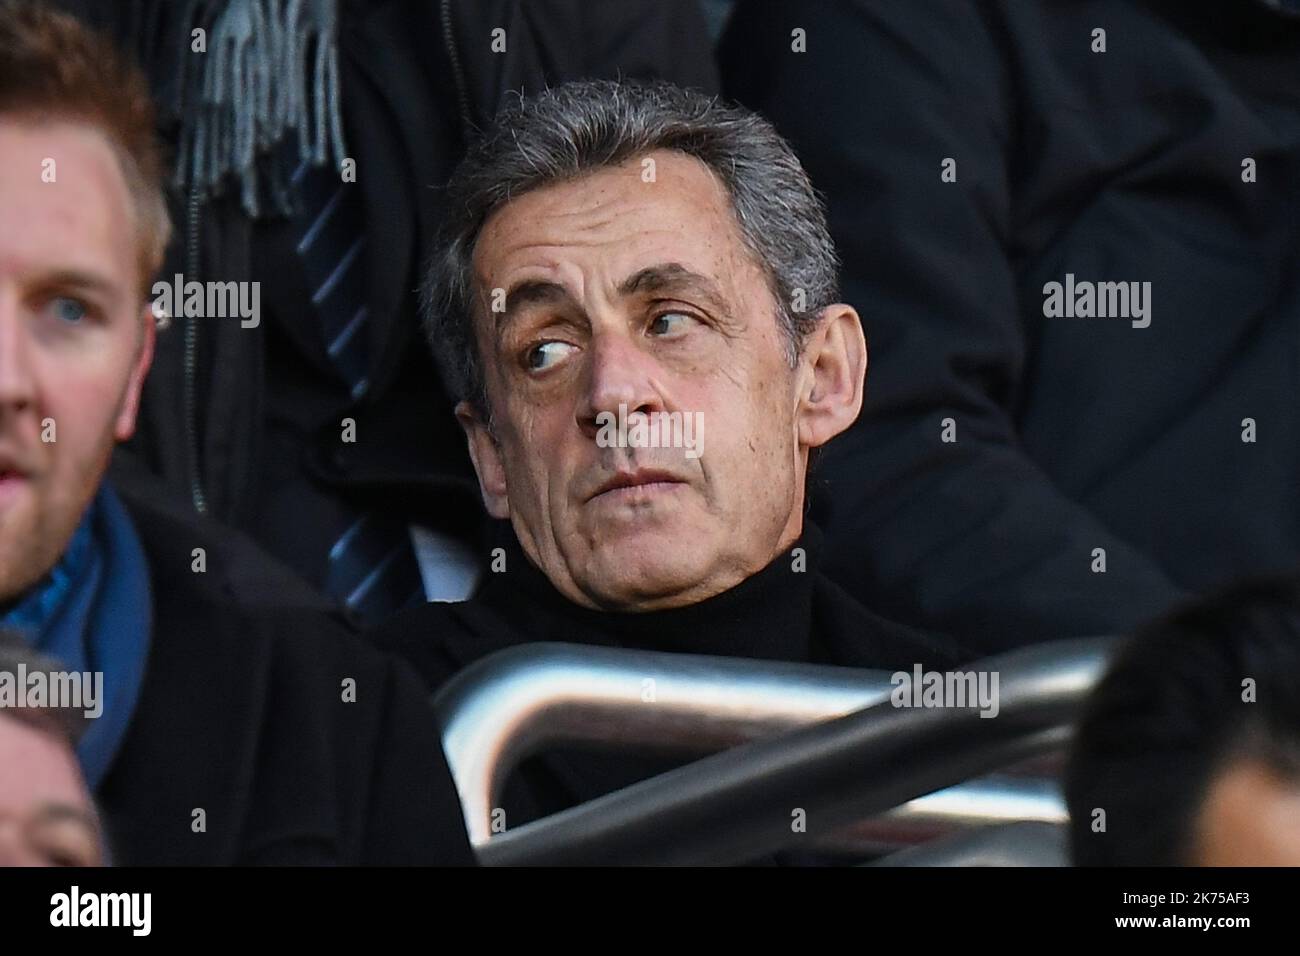 Former french president Nicolas Sarkozy attends  the French Ligue 1 soccer match between Paris Saint Germain (PSG) and Racing Club Strasbourg Alsace at the Parc des Princes stadium in Paris, France, 17 February 2018.  Stock Photo